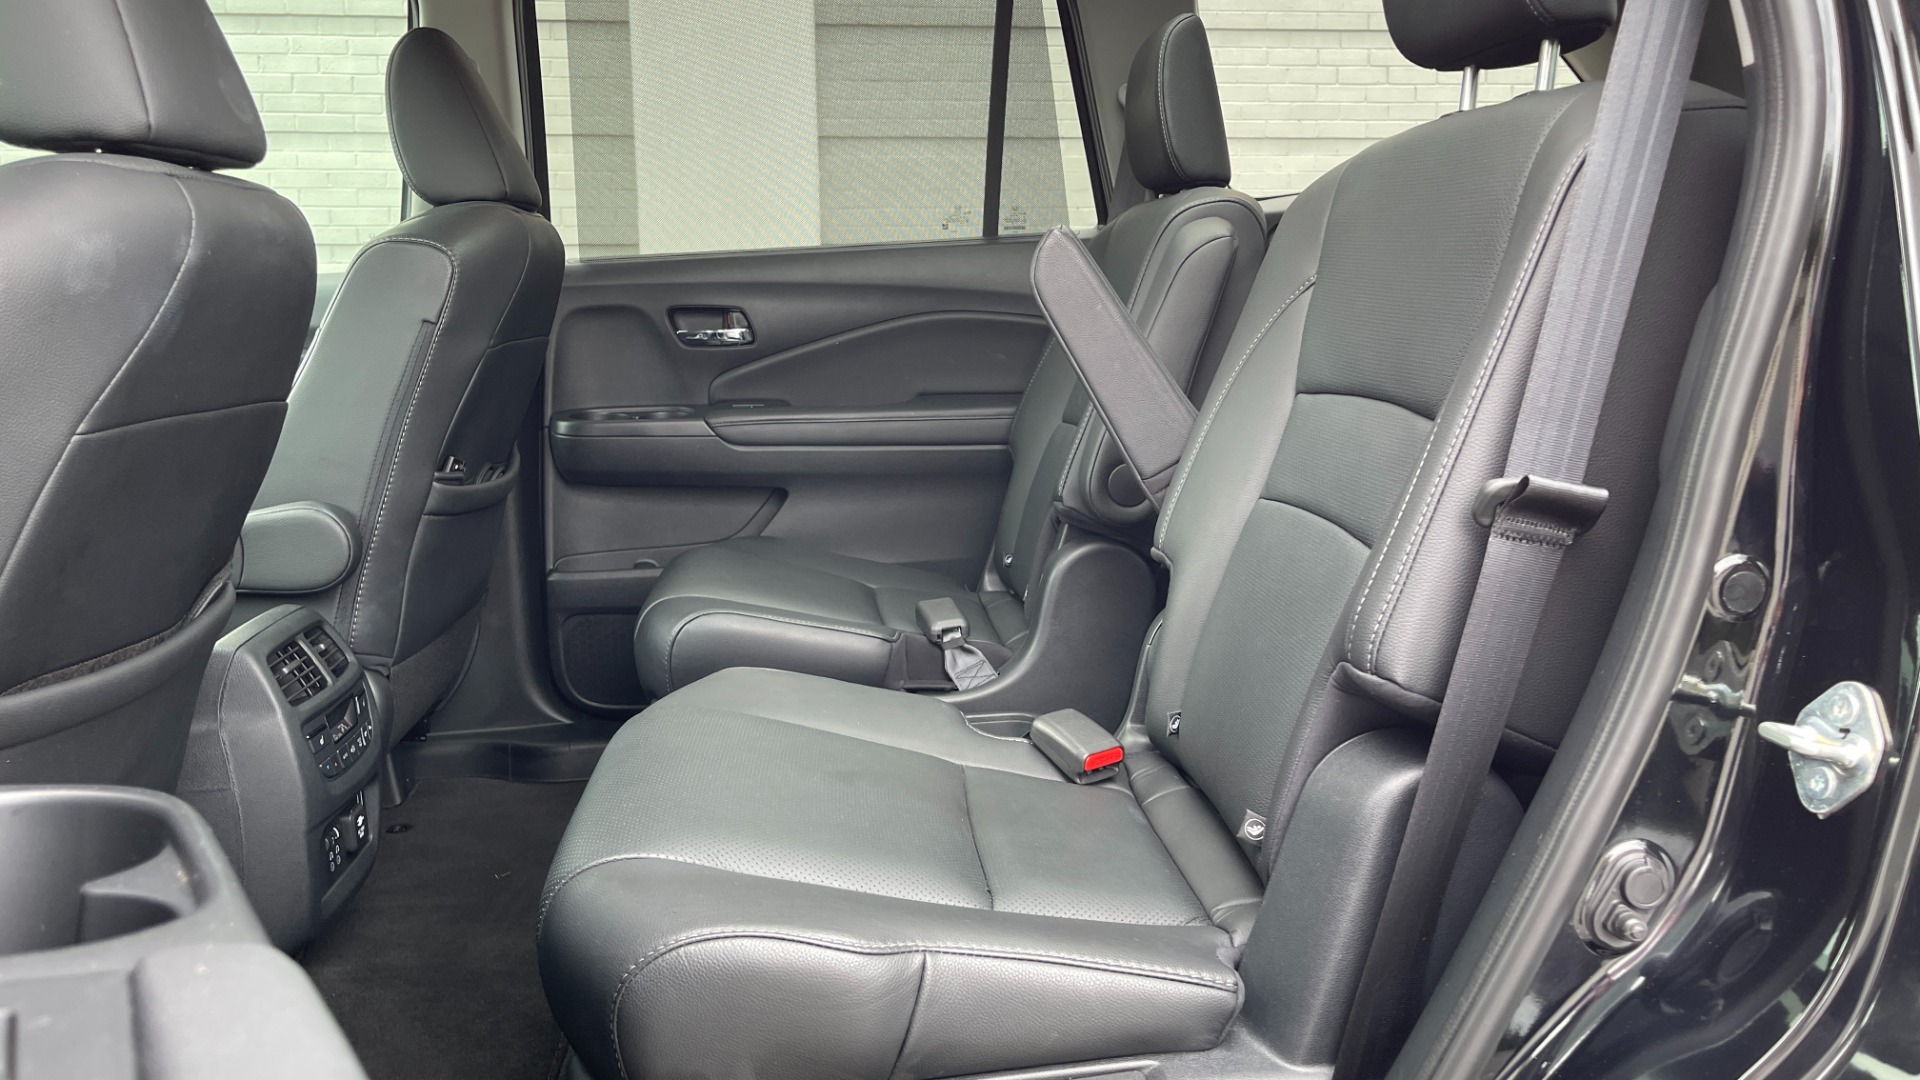 Used 2021 Honda Pilot ELITE / DVD SYSTEM / 3RD ROW / CAPTAINS CHAIRS / LEATHER for sale $42,995 at Formula Imports in Charlotte NC 28227 20